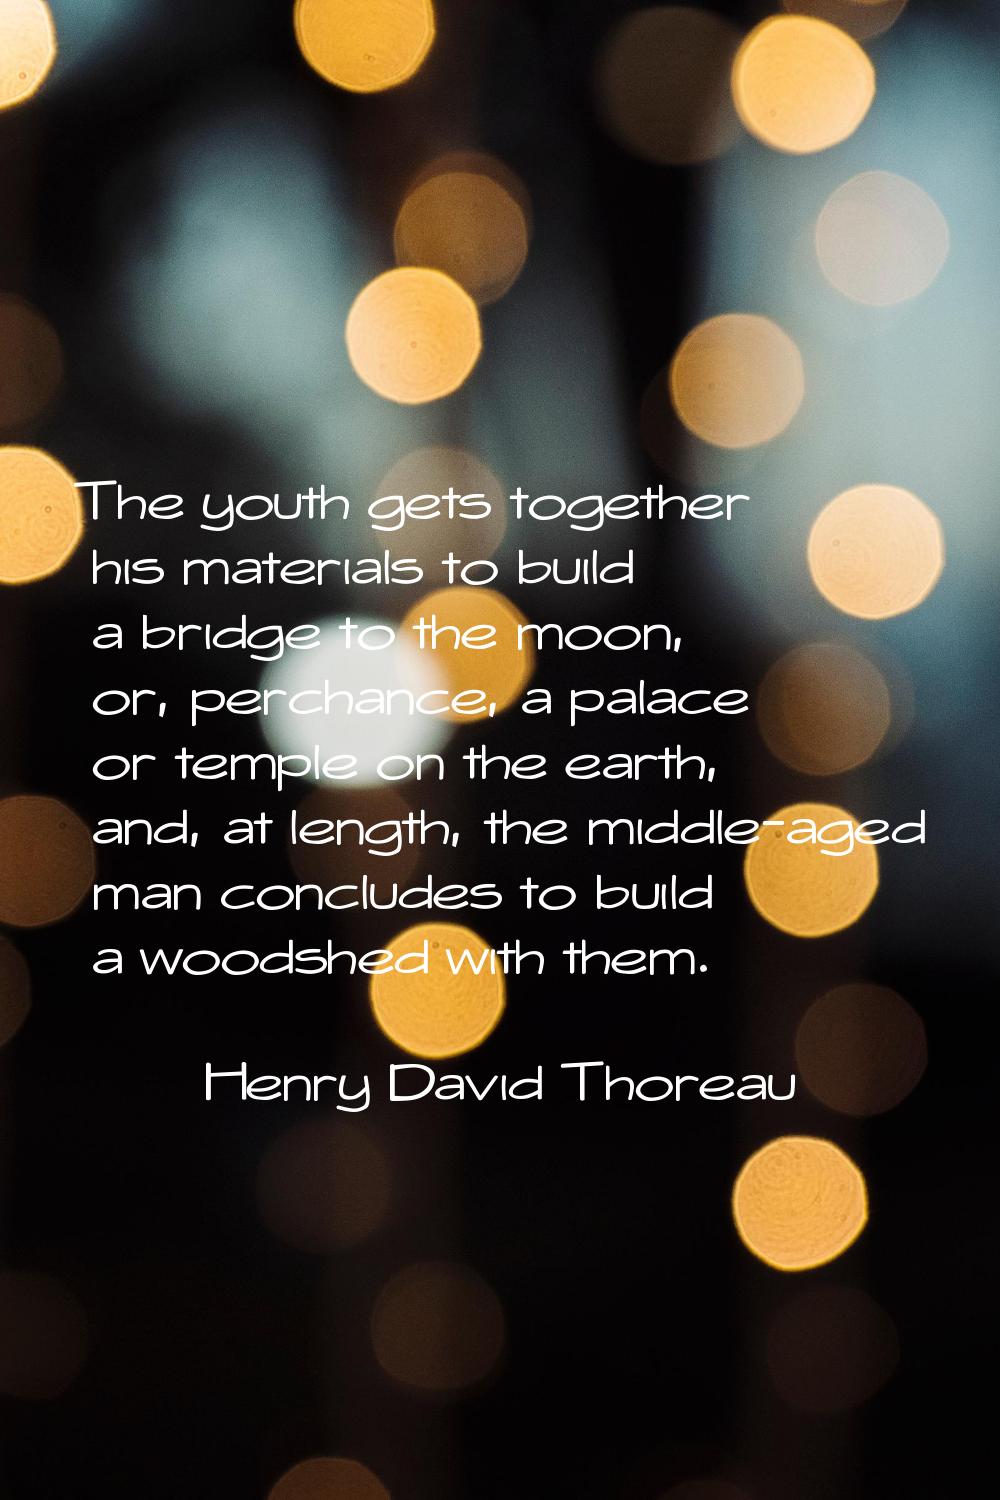 The youth gets together his materials to build a bridge to the moon, or, perchance, a palace or tem